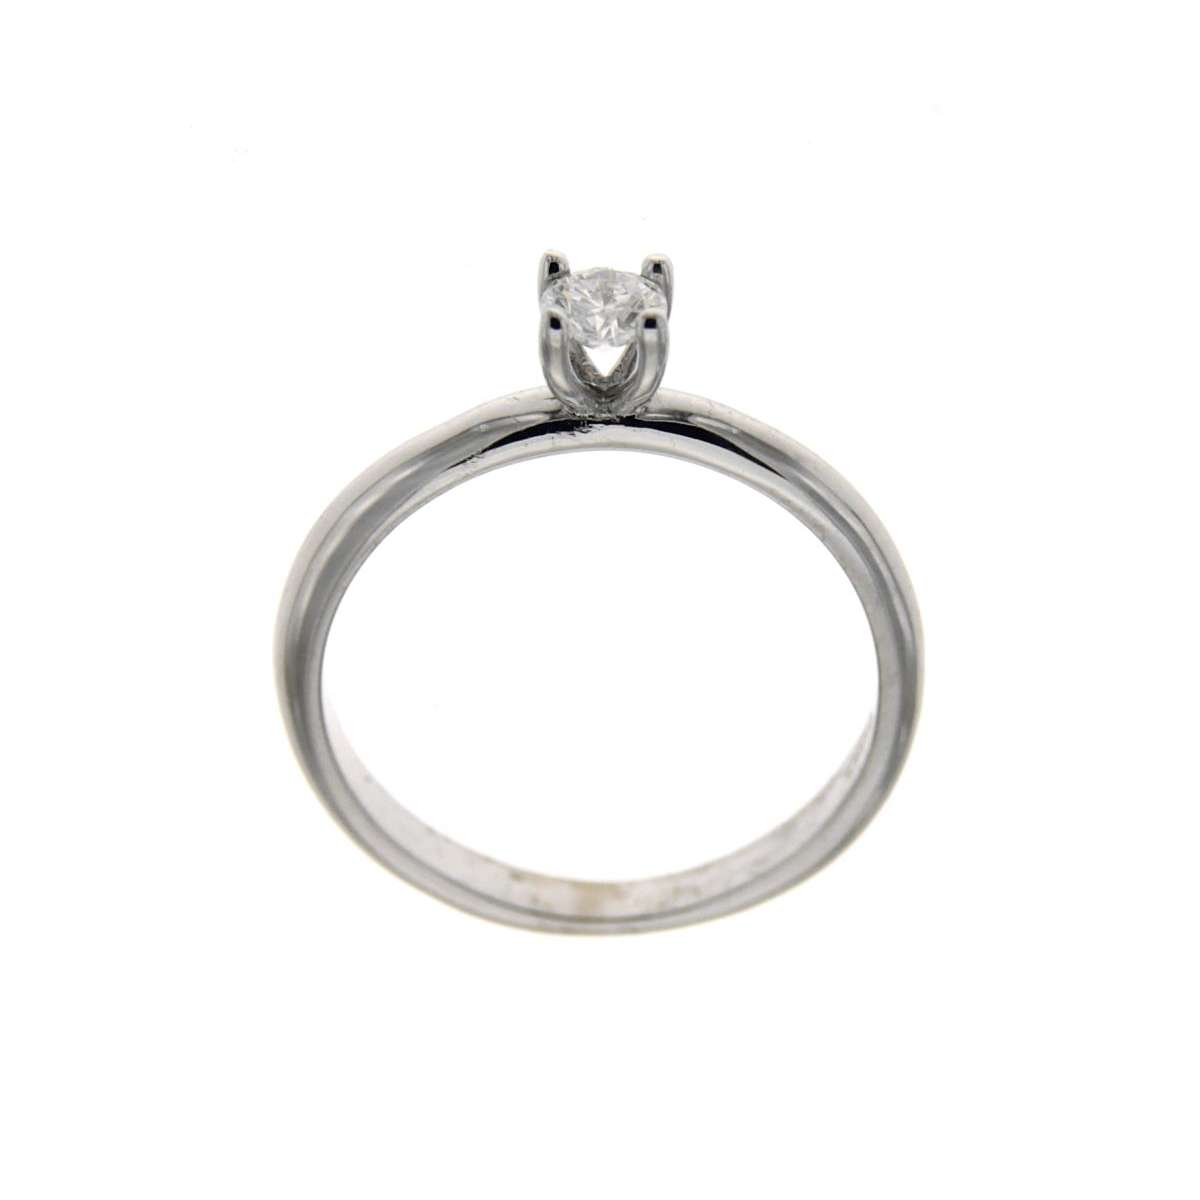 4-prong Solitaire Ring with 0.23 ct G-VS1 Diamond